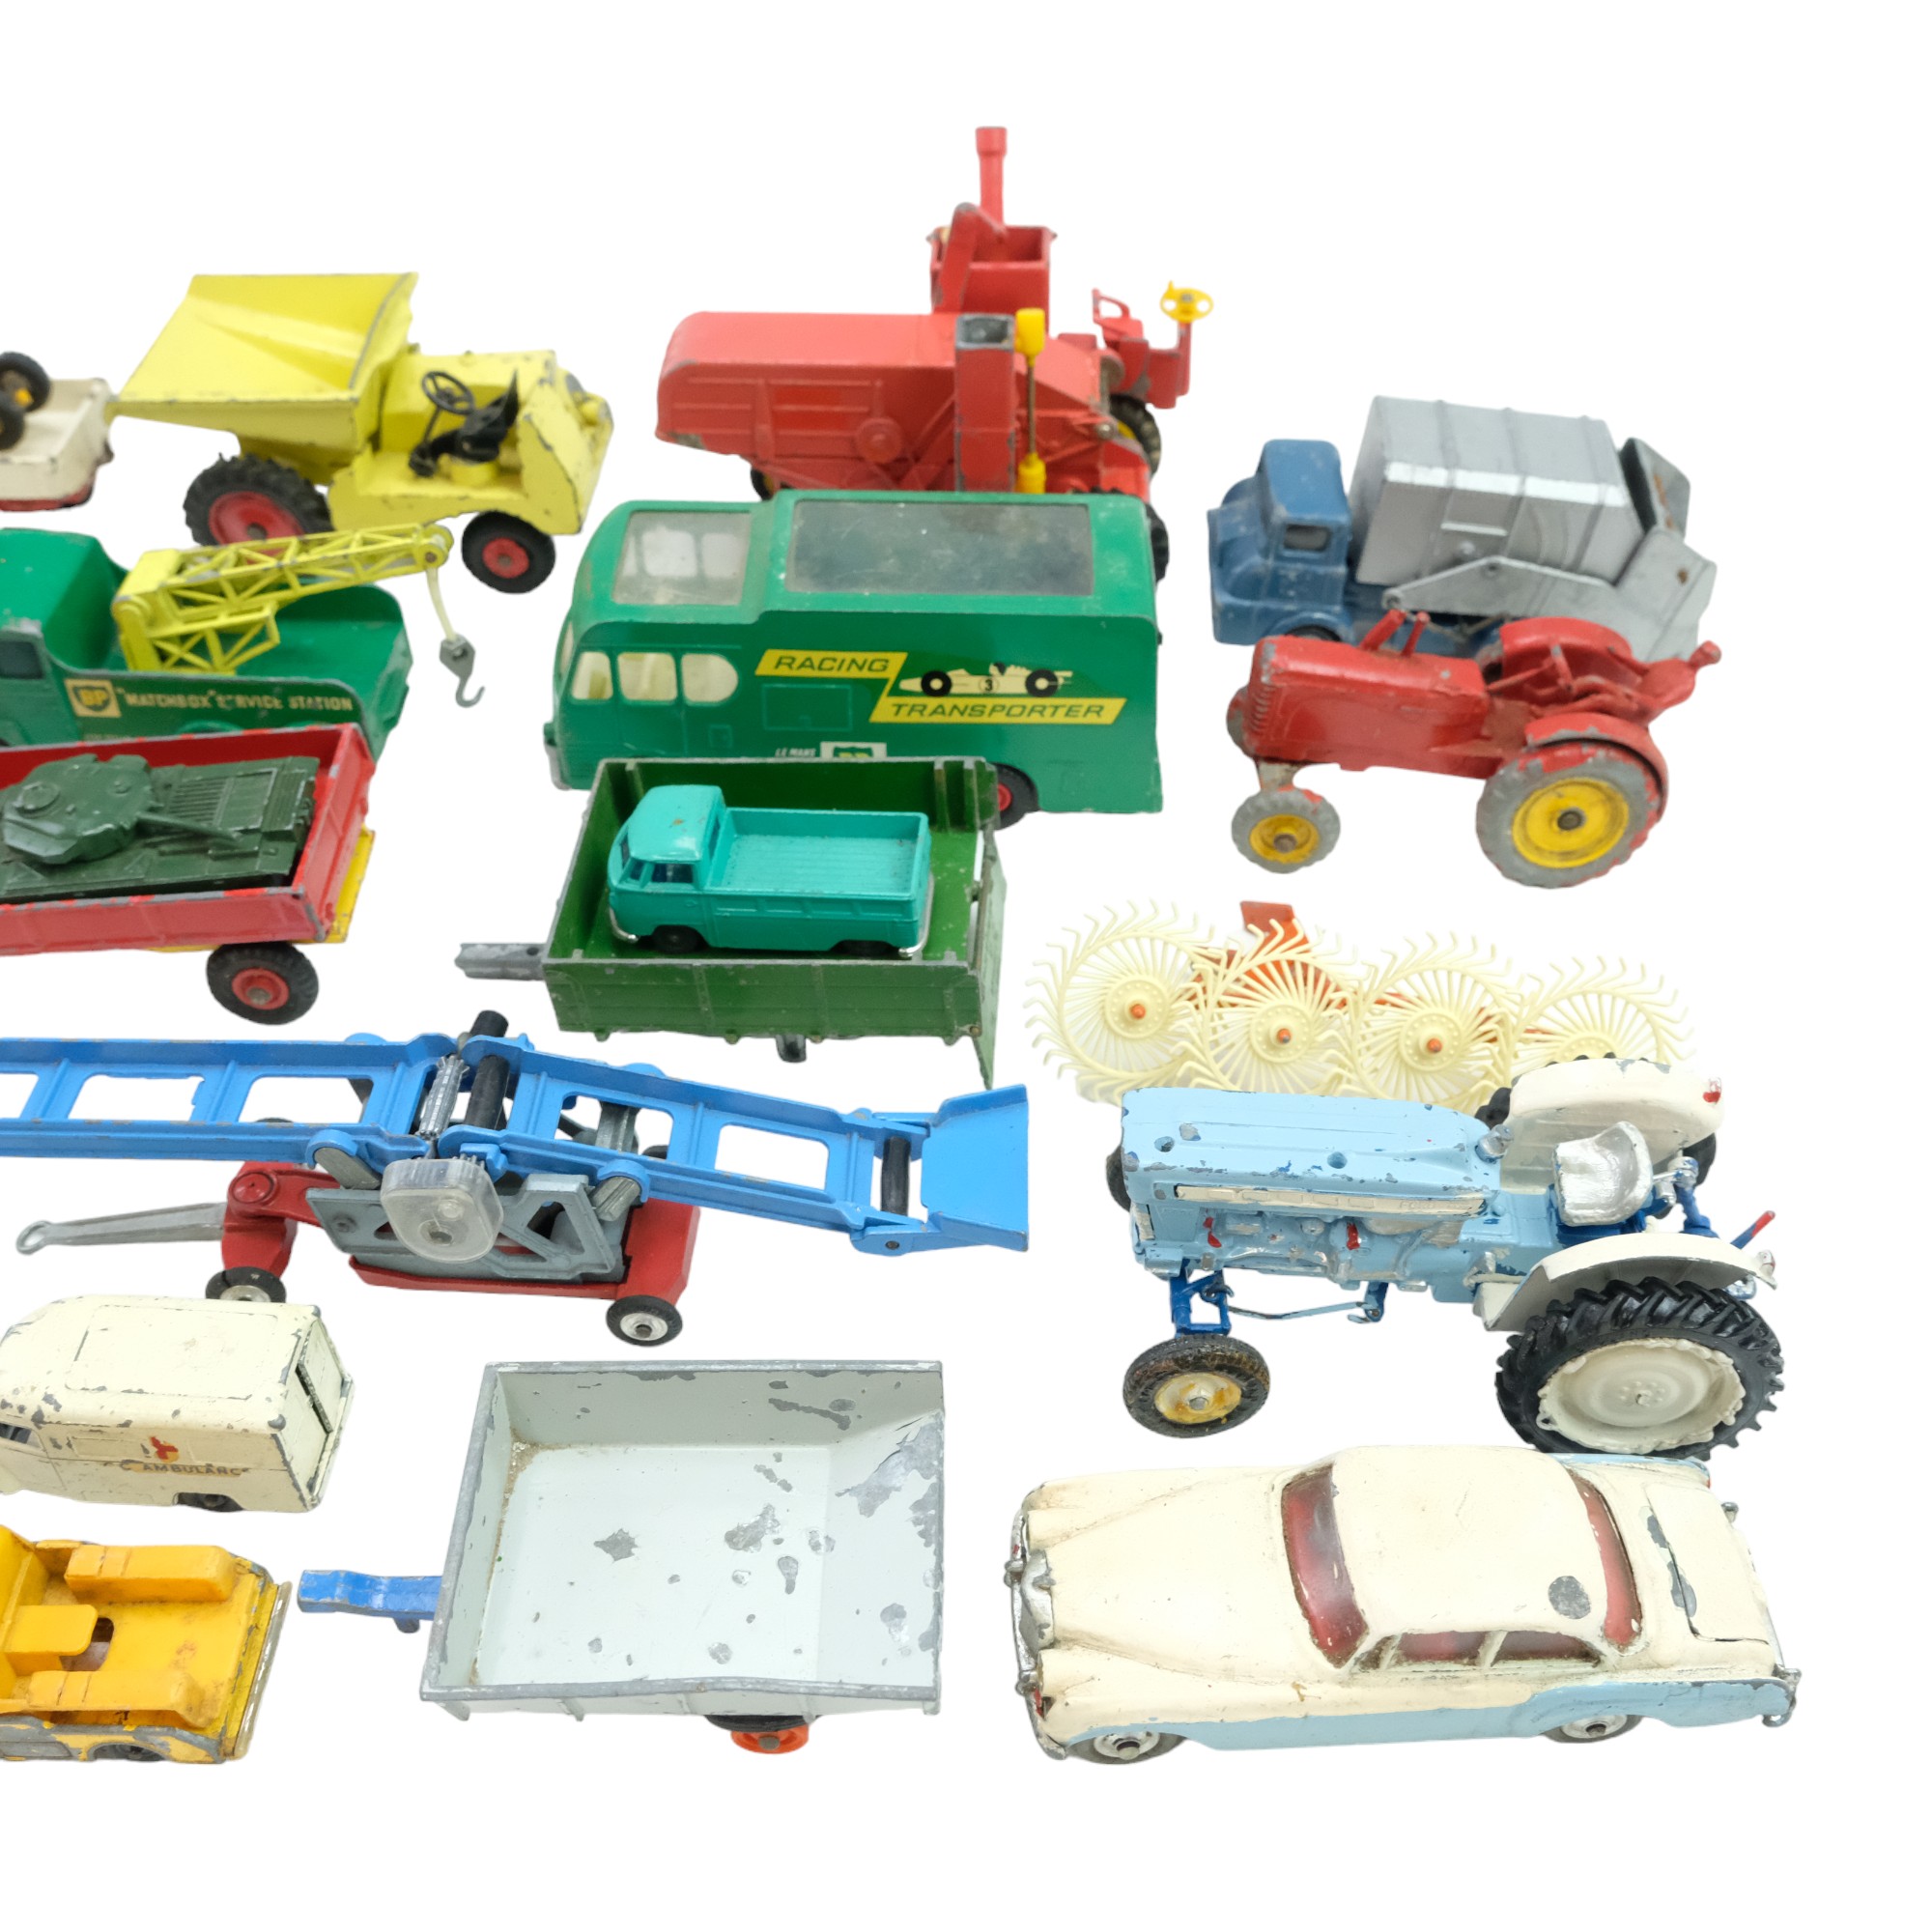 A quantity of Corgi and Matchbox diecast model cars and wagons including a racing transporter and - Image 3 of 5